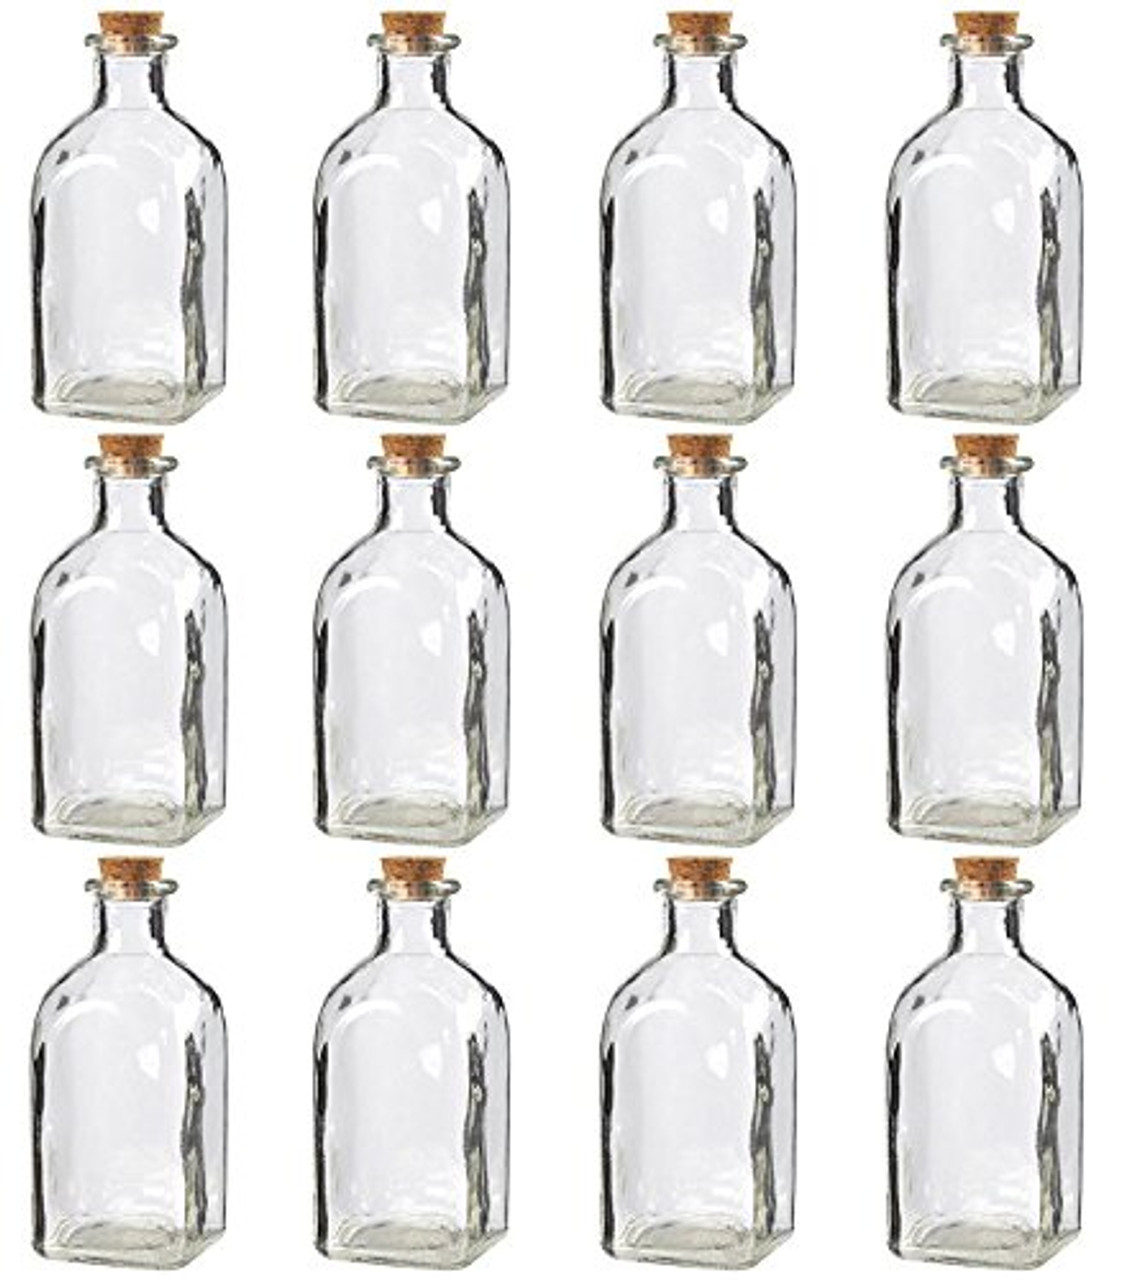 Juvale 12 Pack Clear 6 oz Glass Bottles with Cork Lids, Tiny Vintage Style Potion Vases for Party Favors, DIY Crafts (180 ml)